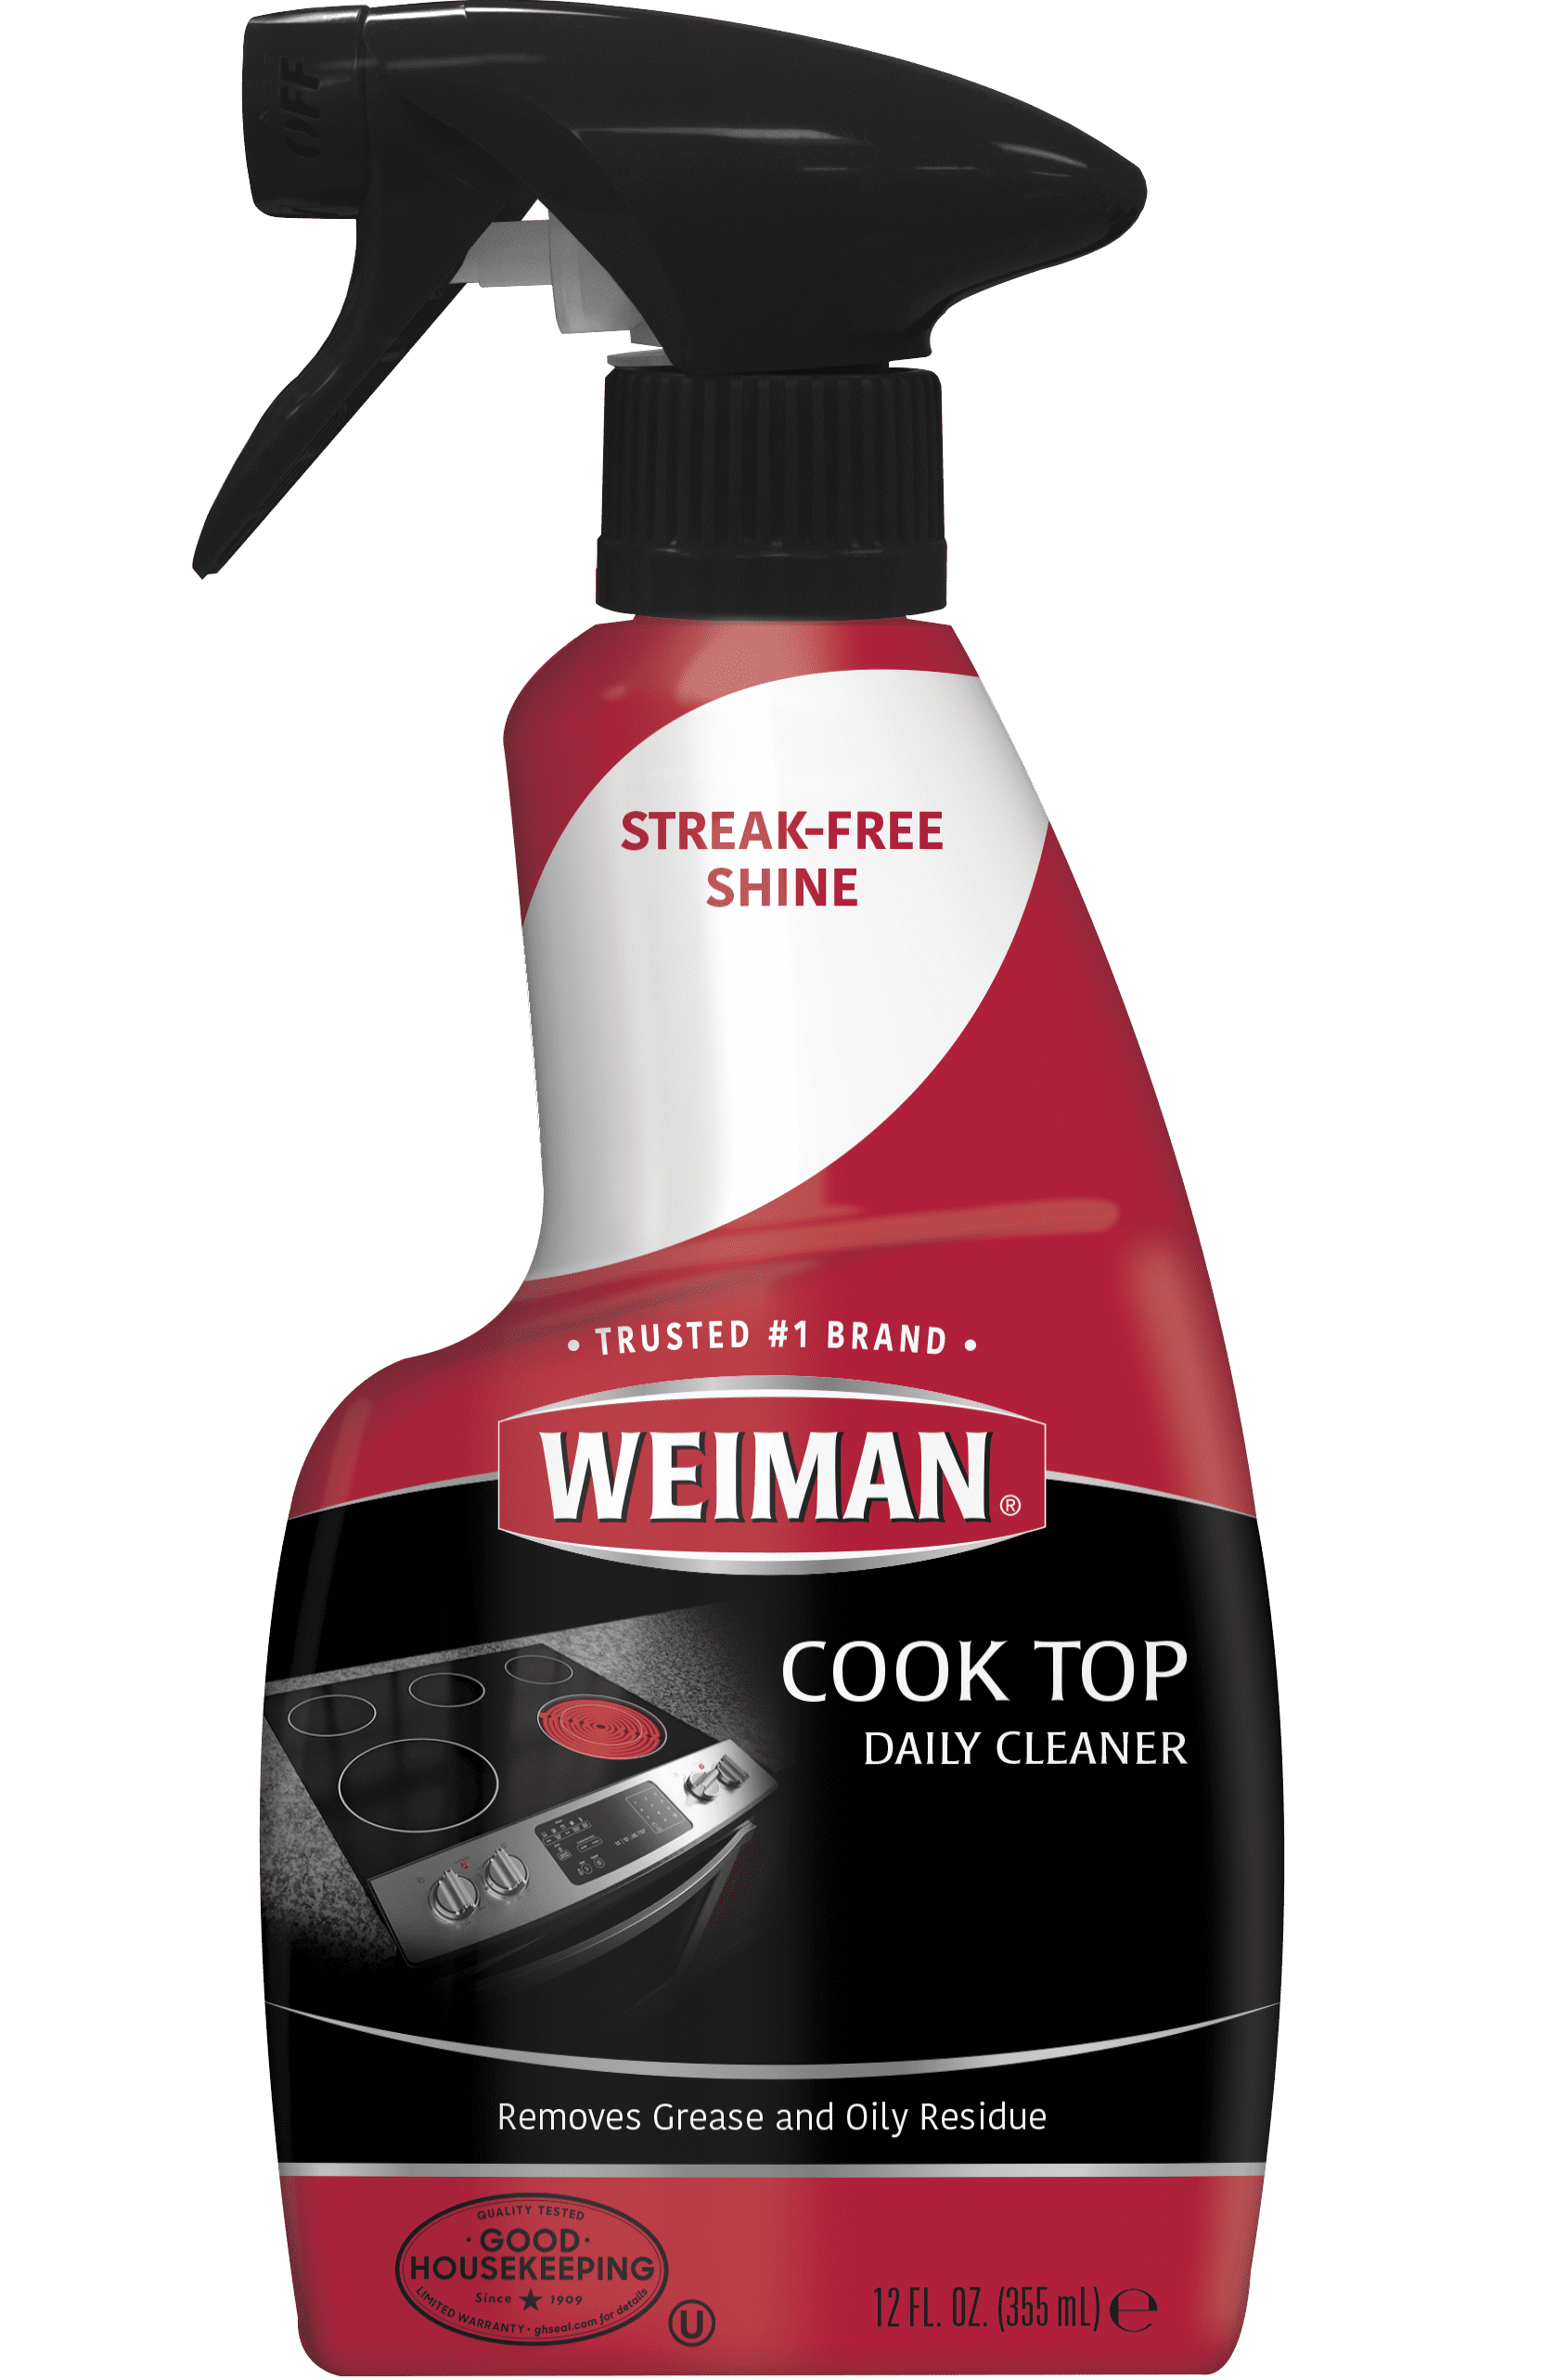 Weiman Cook Top Daily Cleaner, 12 fl oz